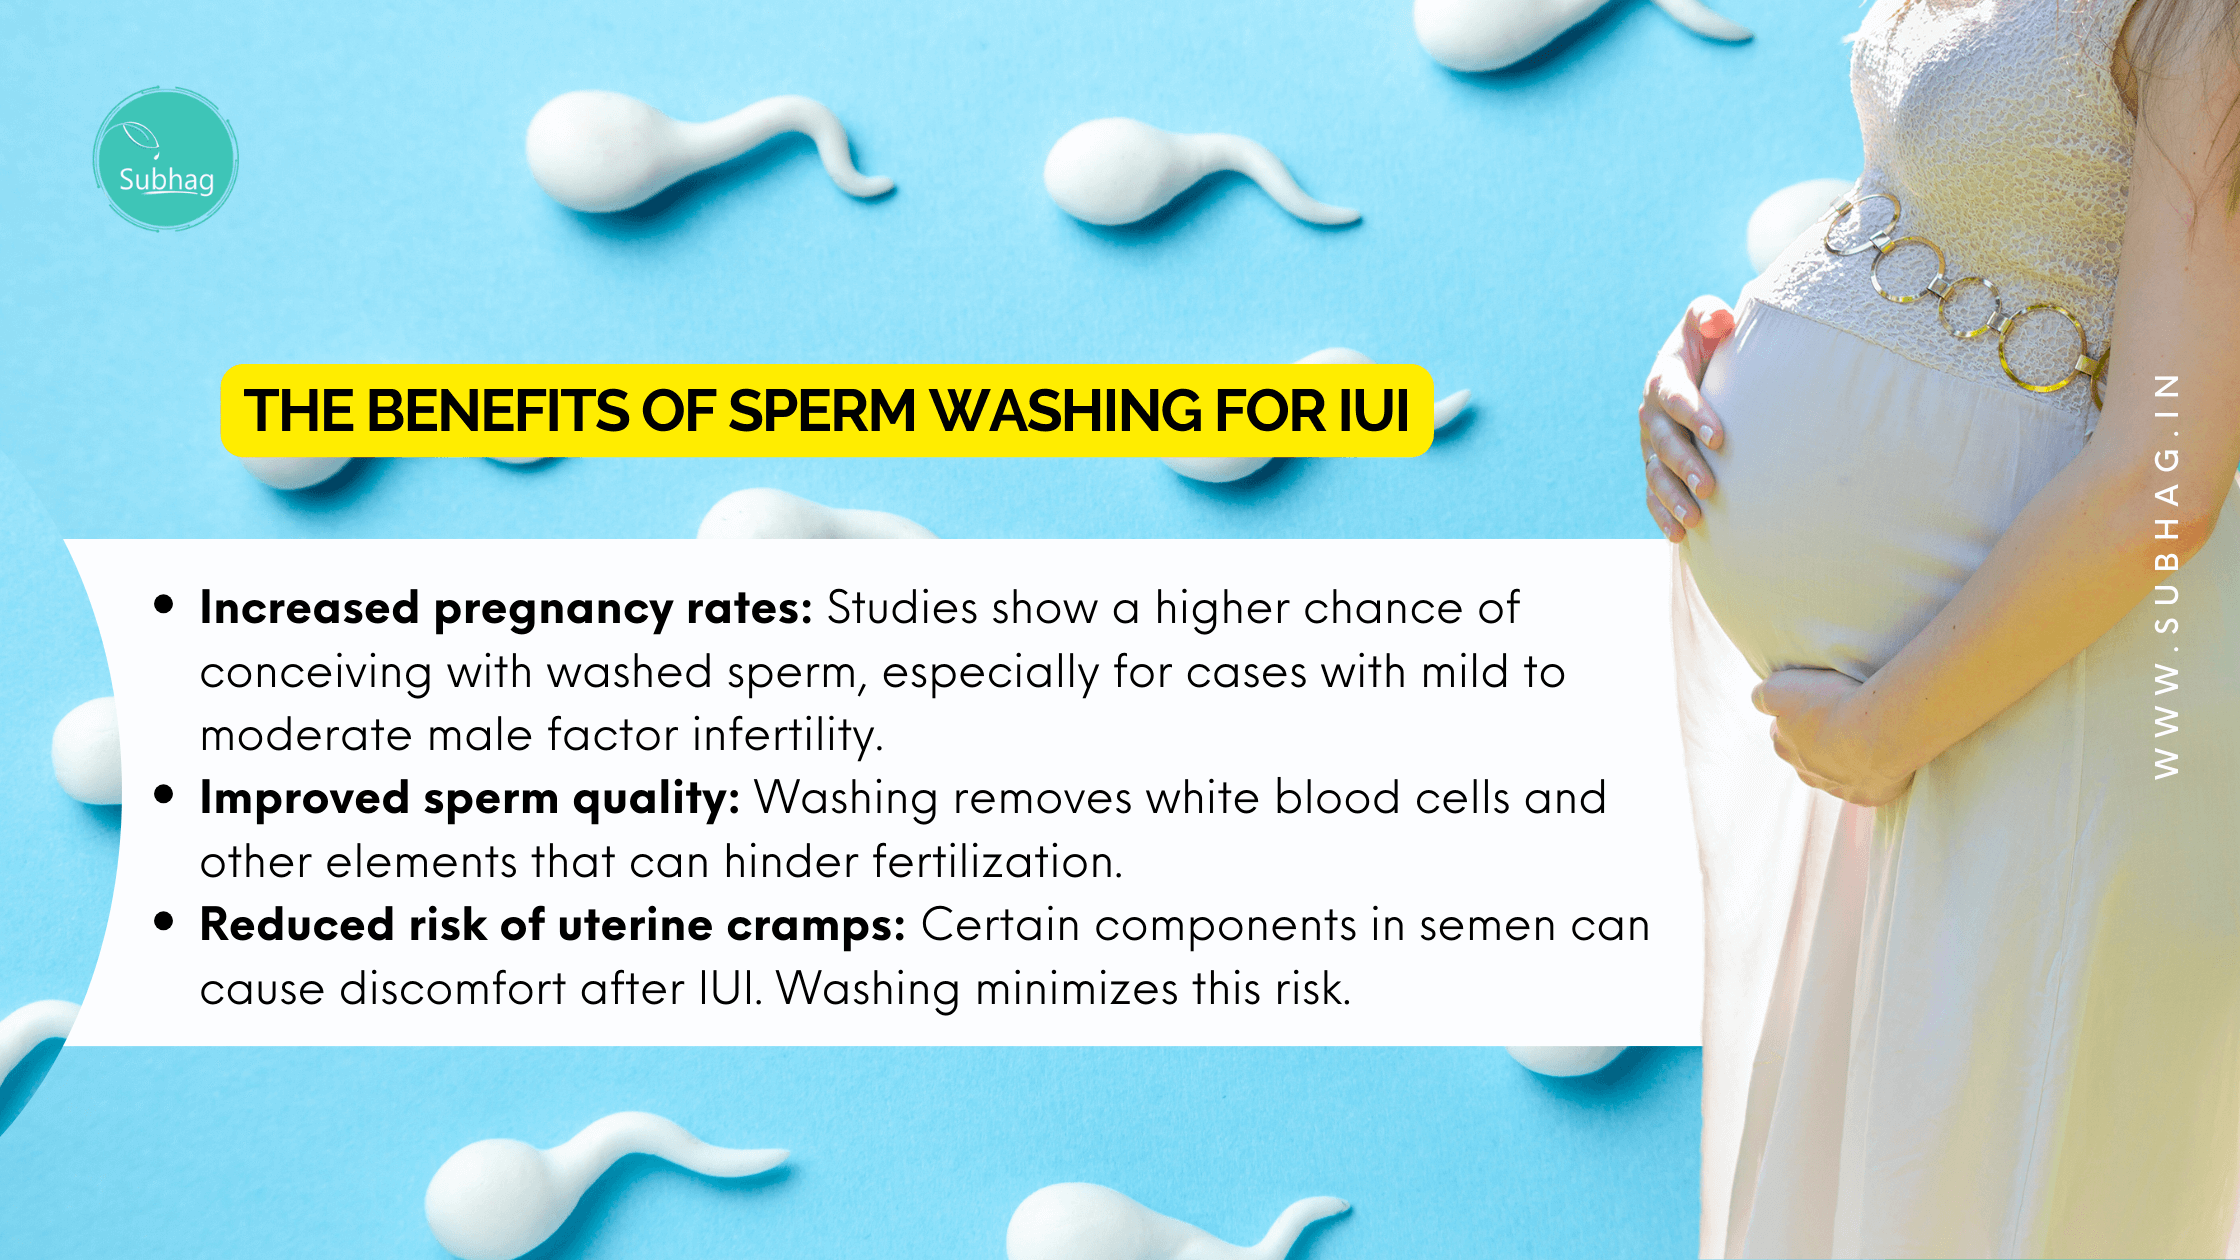 The Benefits of Sperm Washing for IUI